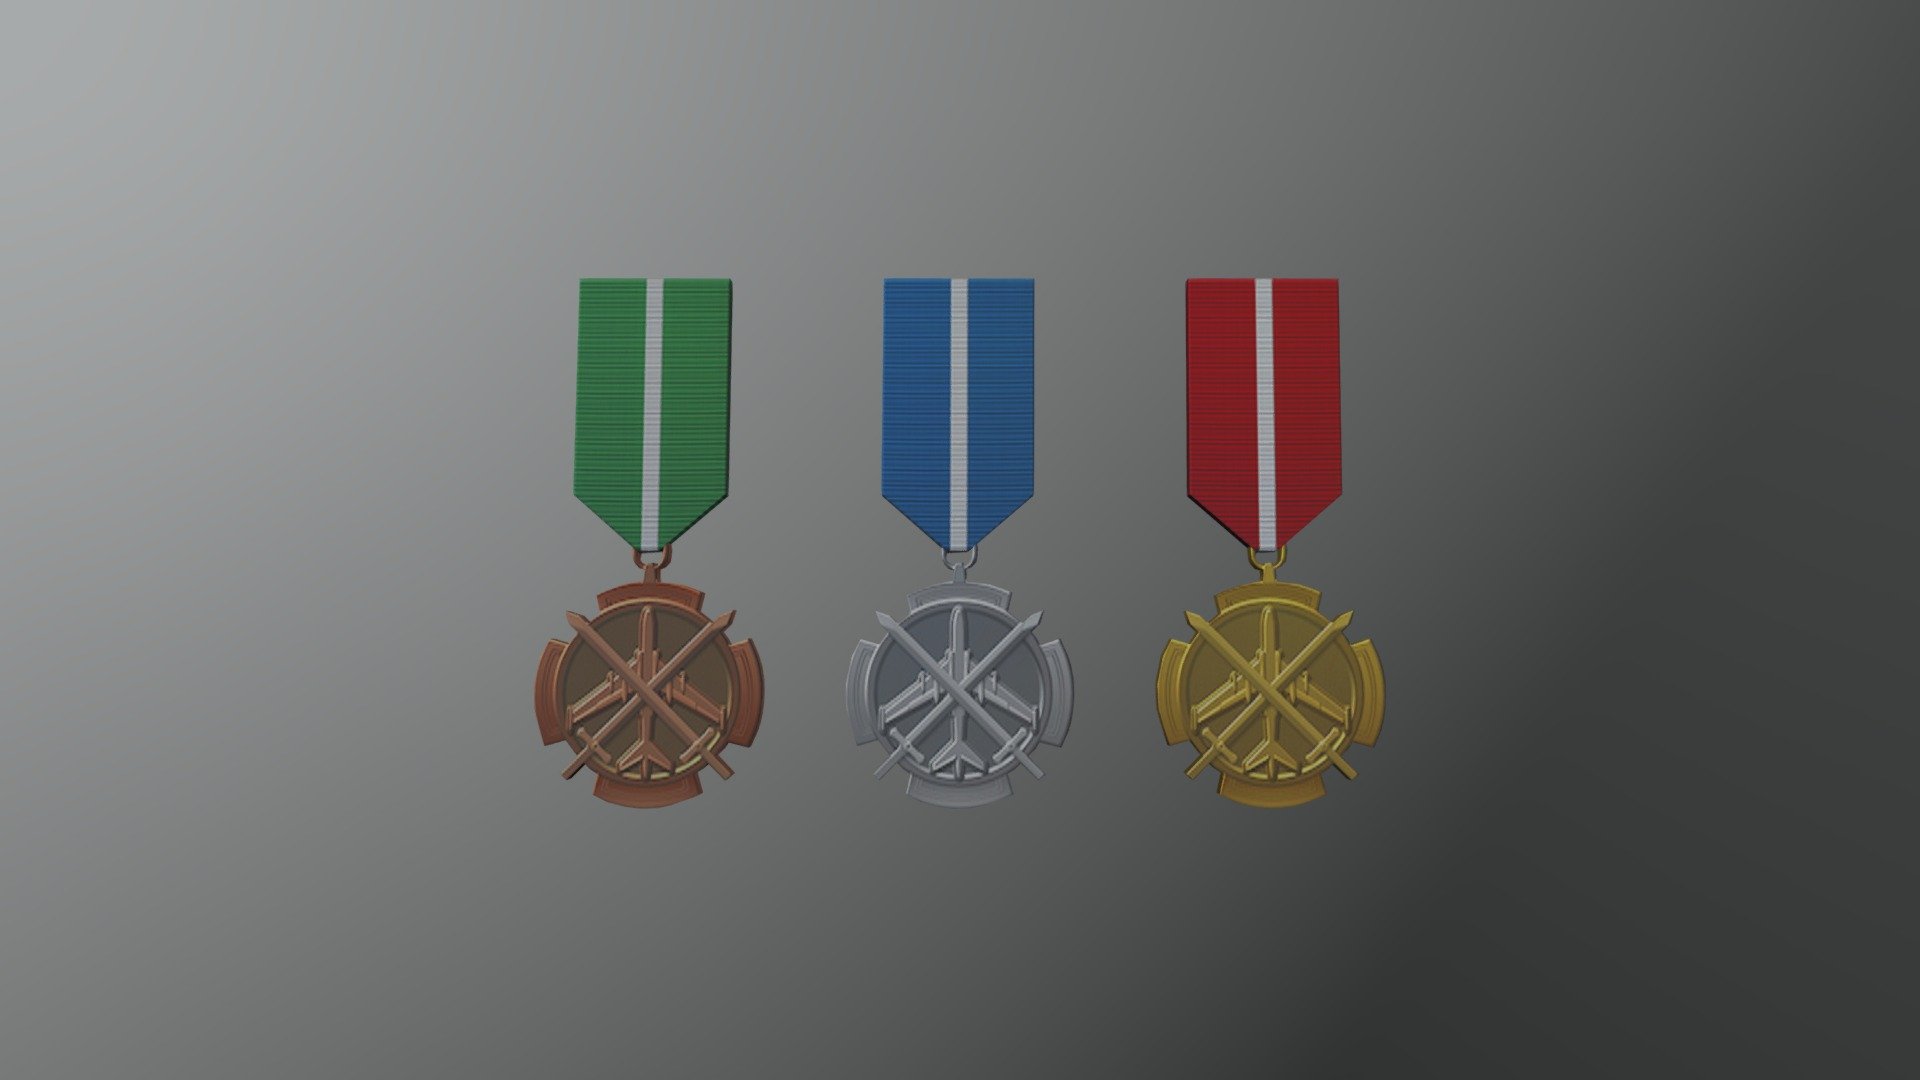 Some Models i made when i was bored :-)

Ace Medals form Ace Combat 7: Skies Unknown:

-Bronze Ace Medal
-Silver Ace Medal
-Gold Ace Medal

(Textures from https://acecombat.fandom.com/wiki/Ace_Combat_7:_Skies_Unknown/Medals) - Ace Medals (Ace Combat 7) - Download Free 3D model by Luna Wallenstein (@Lunwaa) 3d model